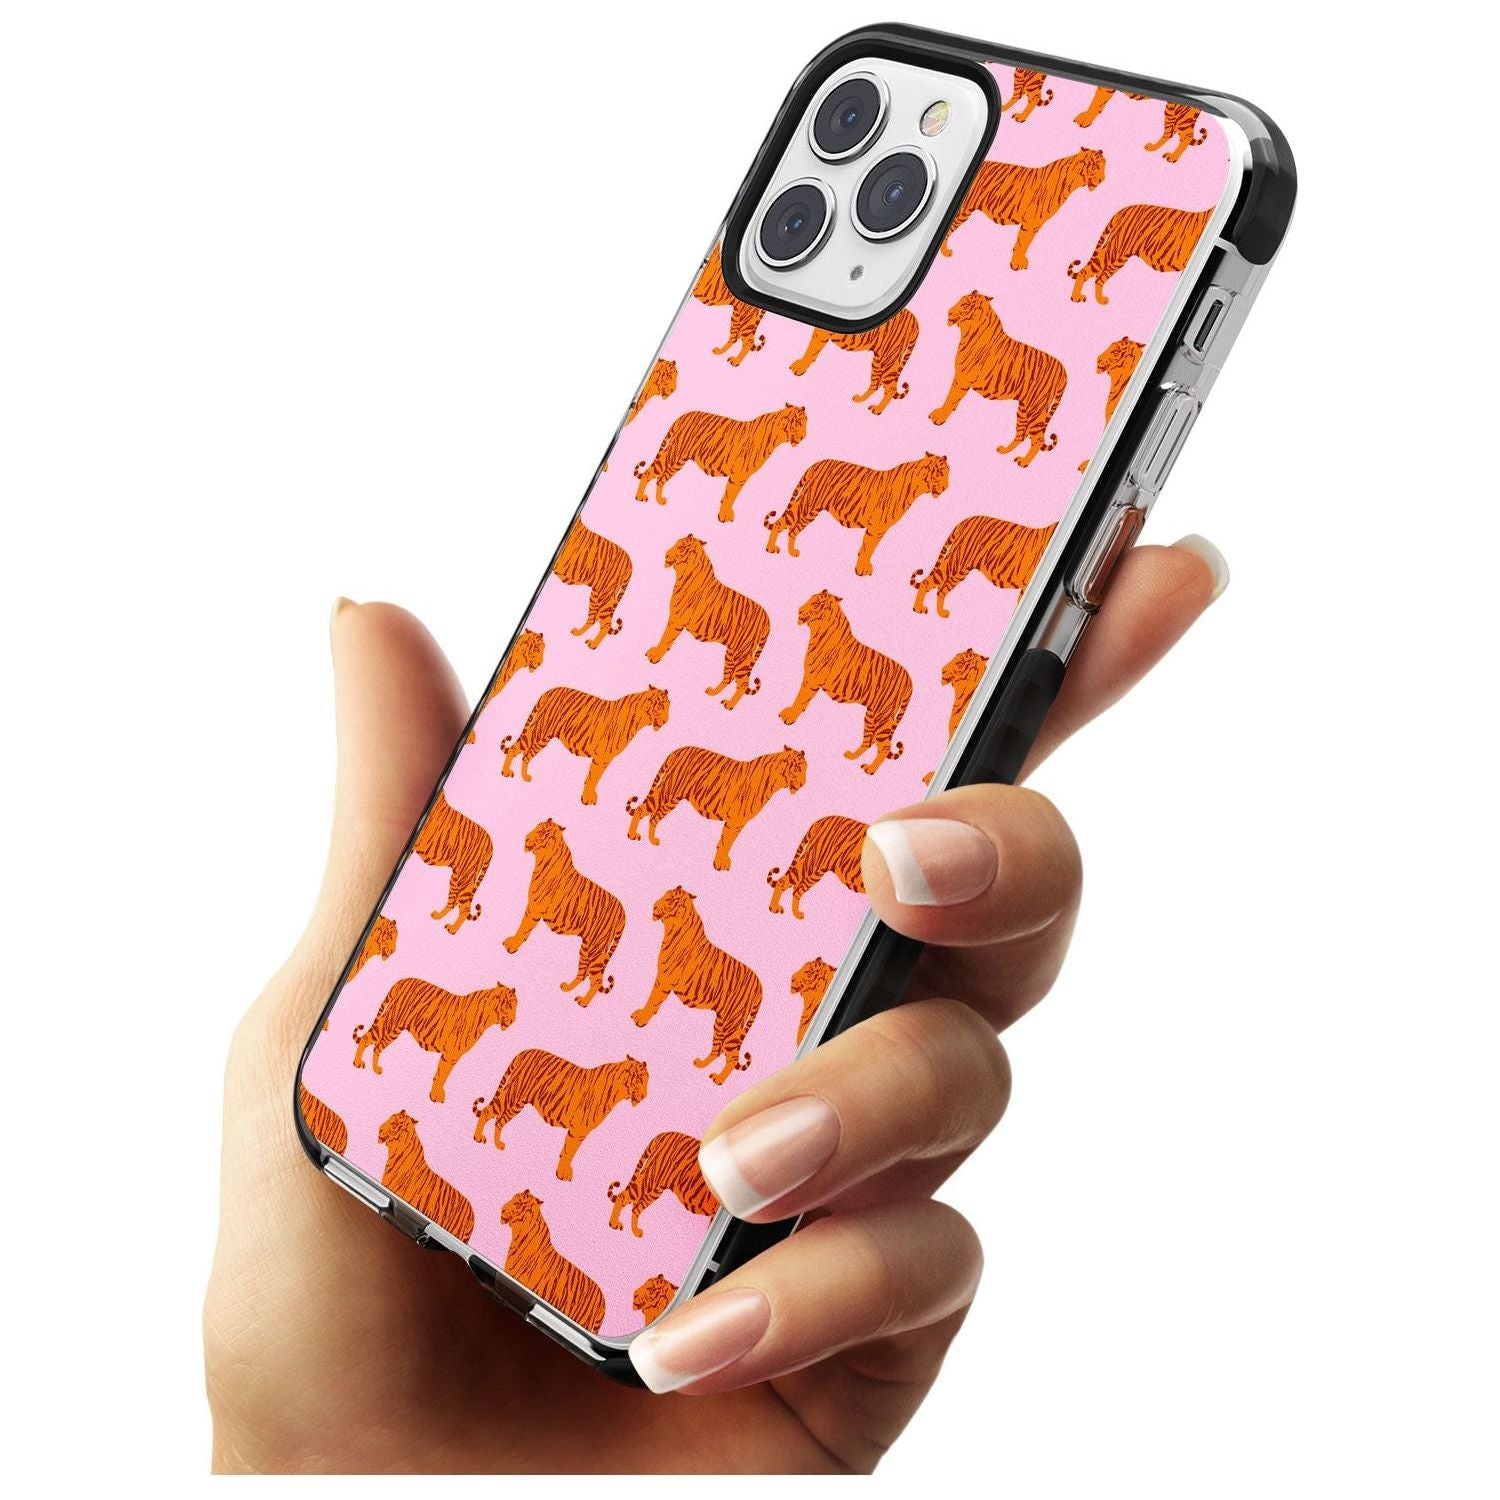 Tigers on Pink Pattern Black Impact Phone Case for iPhone 11 Pro Max